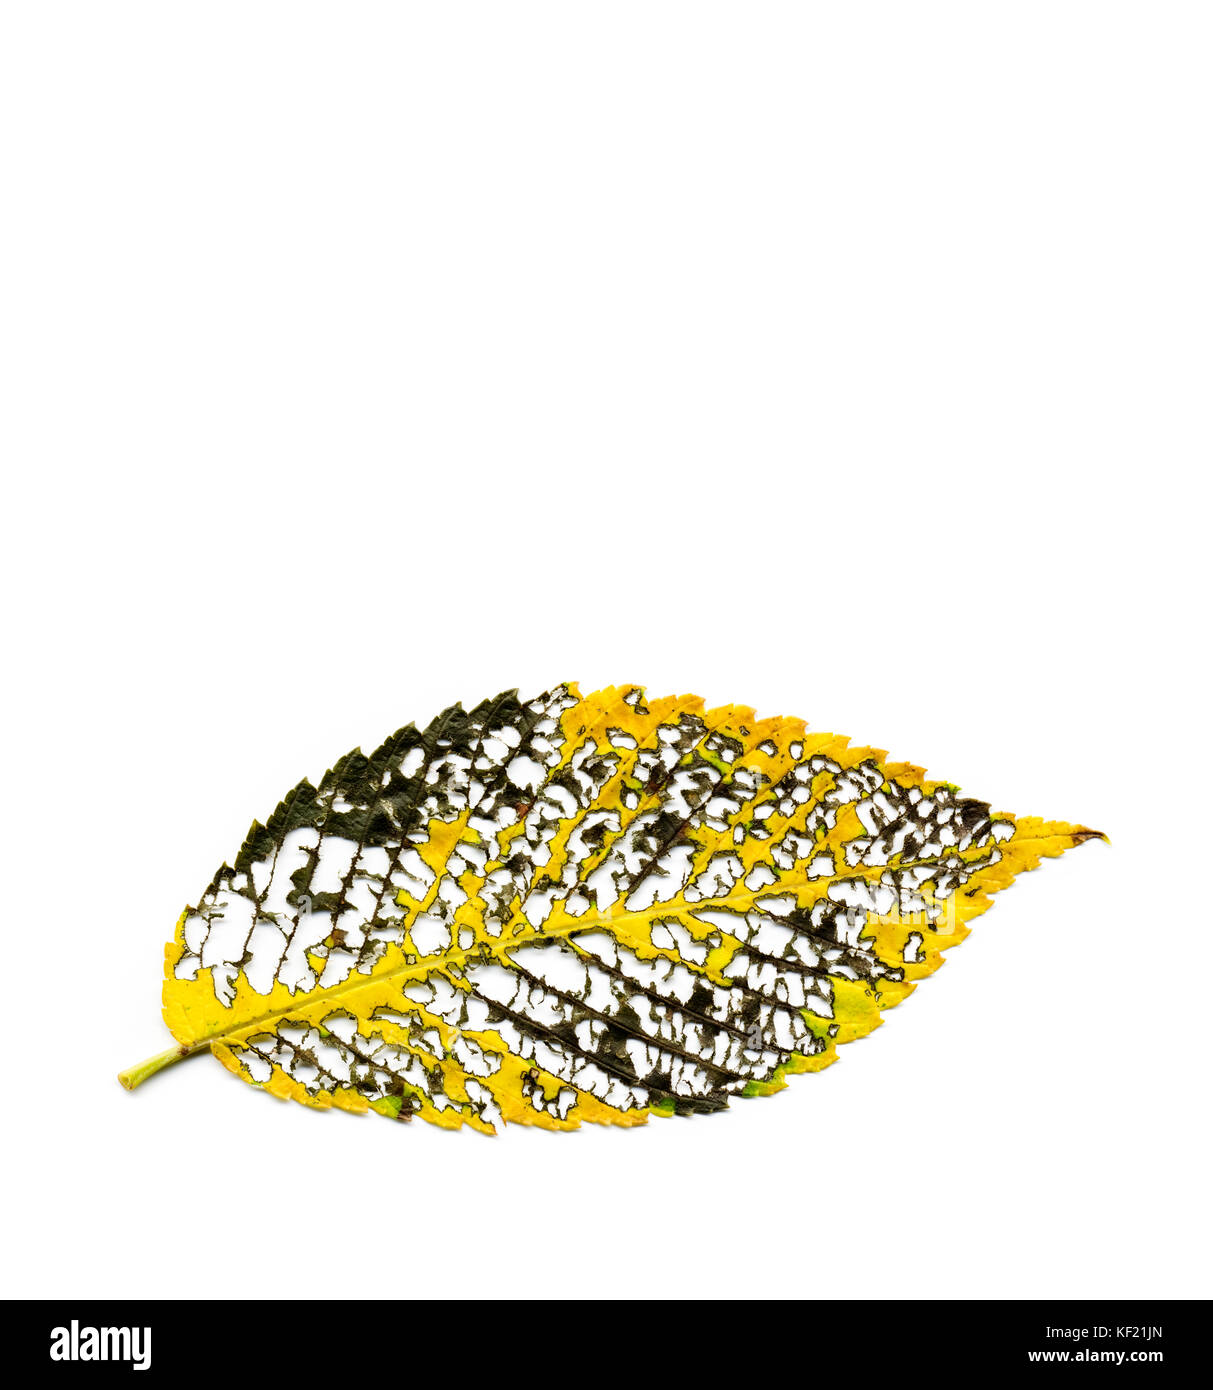 Insect damage on autumn elm leaf leaves skeletal vein structure on white background Stock Photo